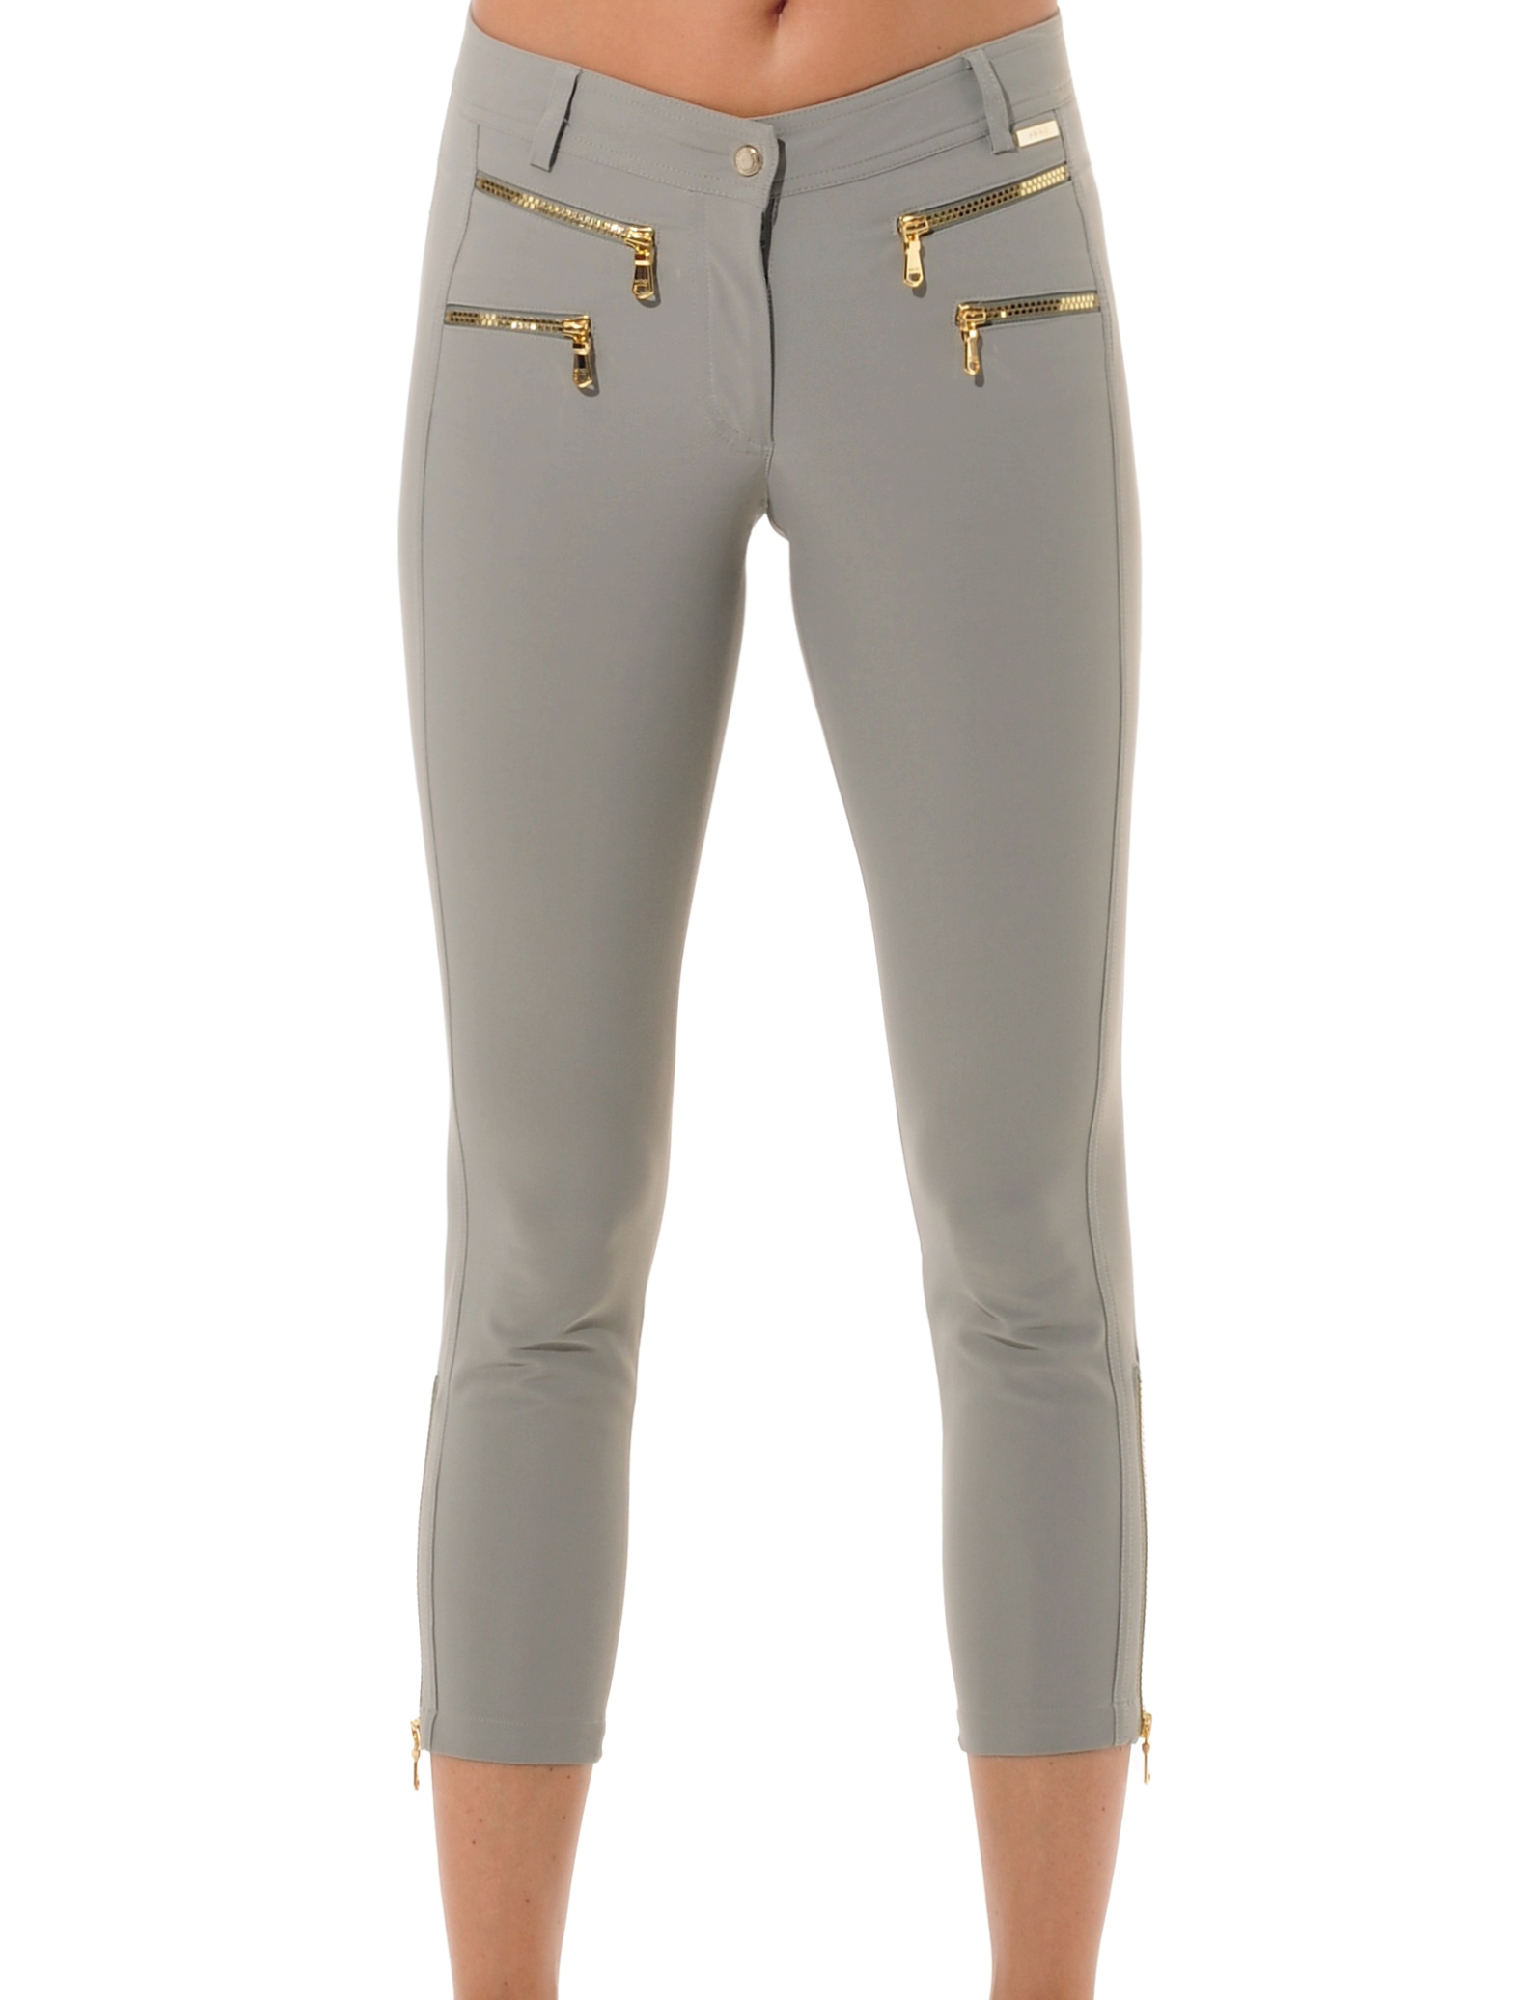 4way stretch shiny gold cube double zip cropped pants jade 